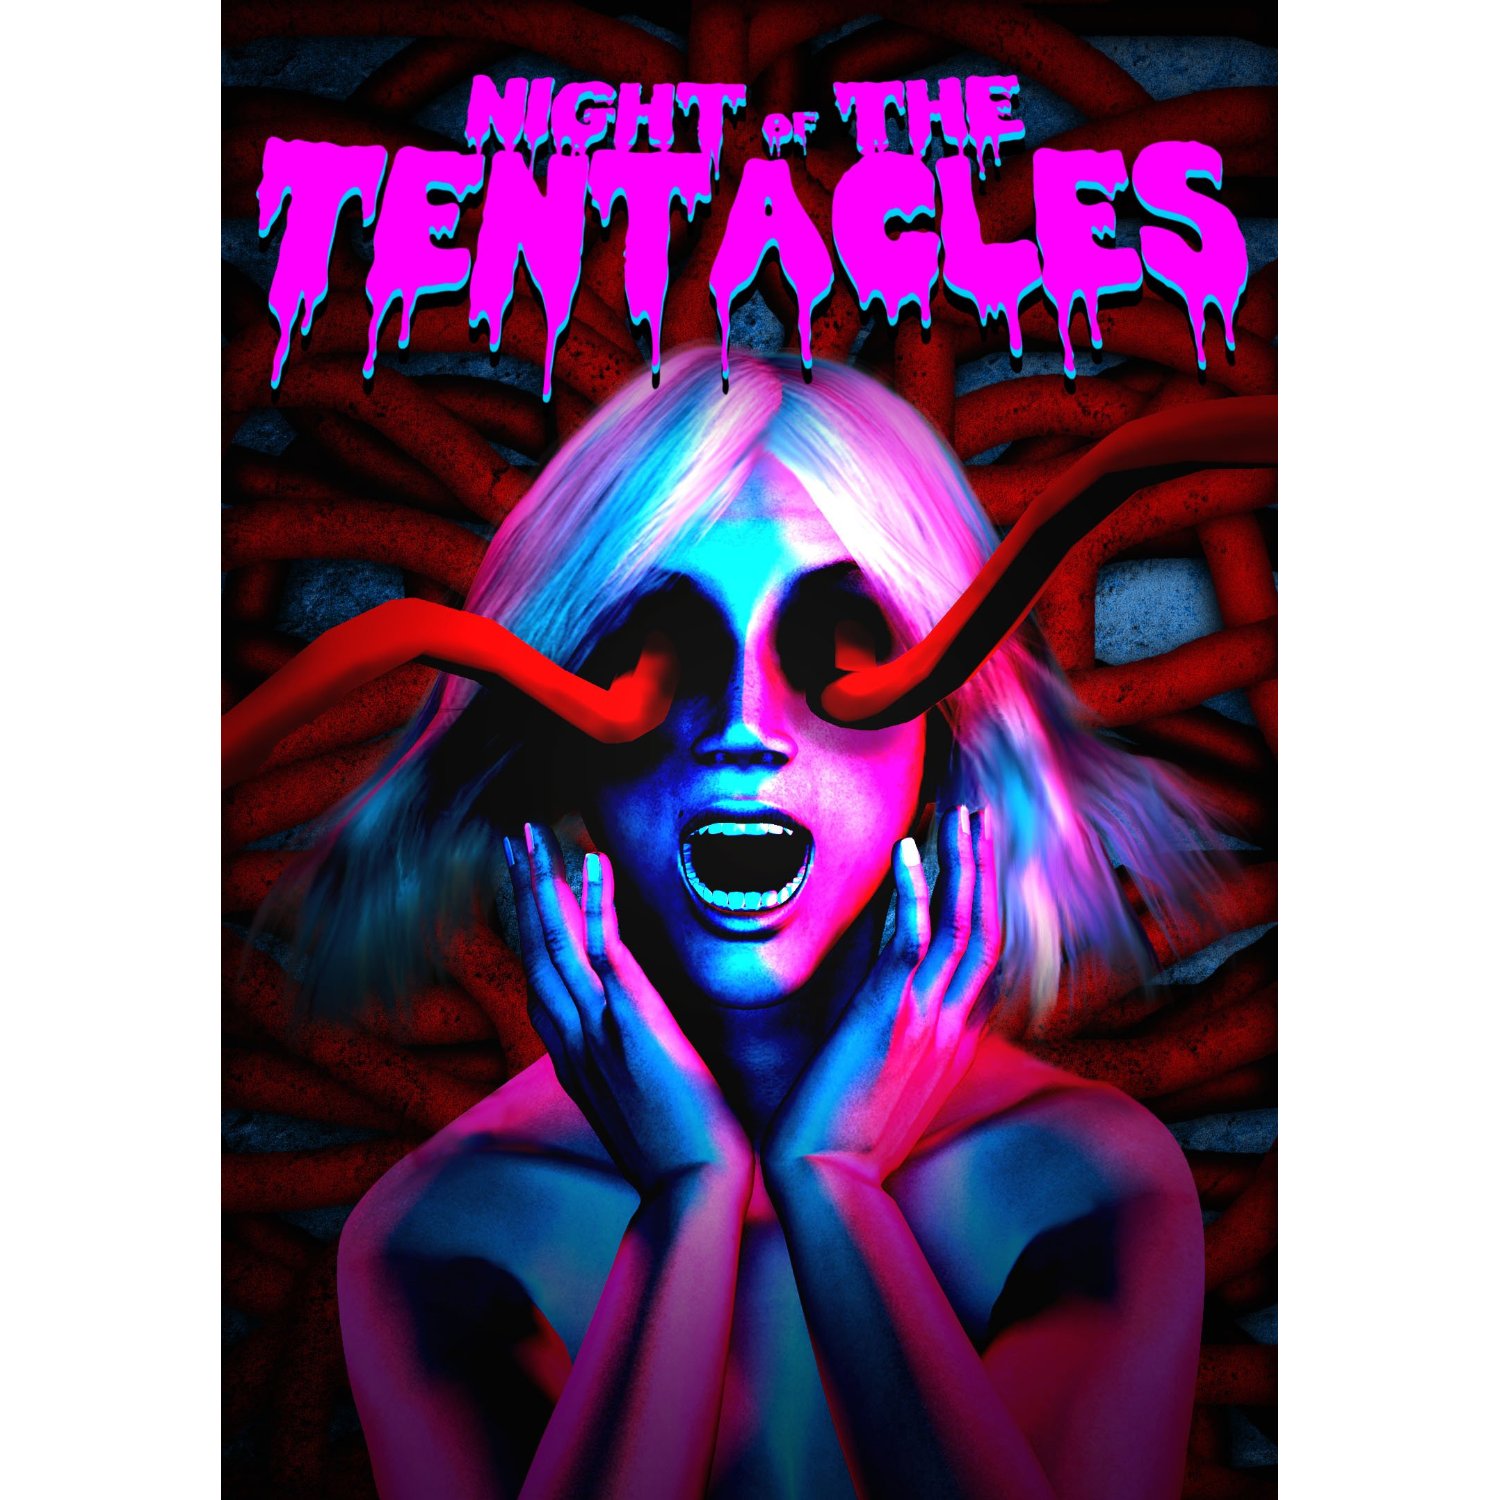 NIGHT OF THE TENTACLES